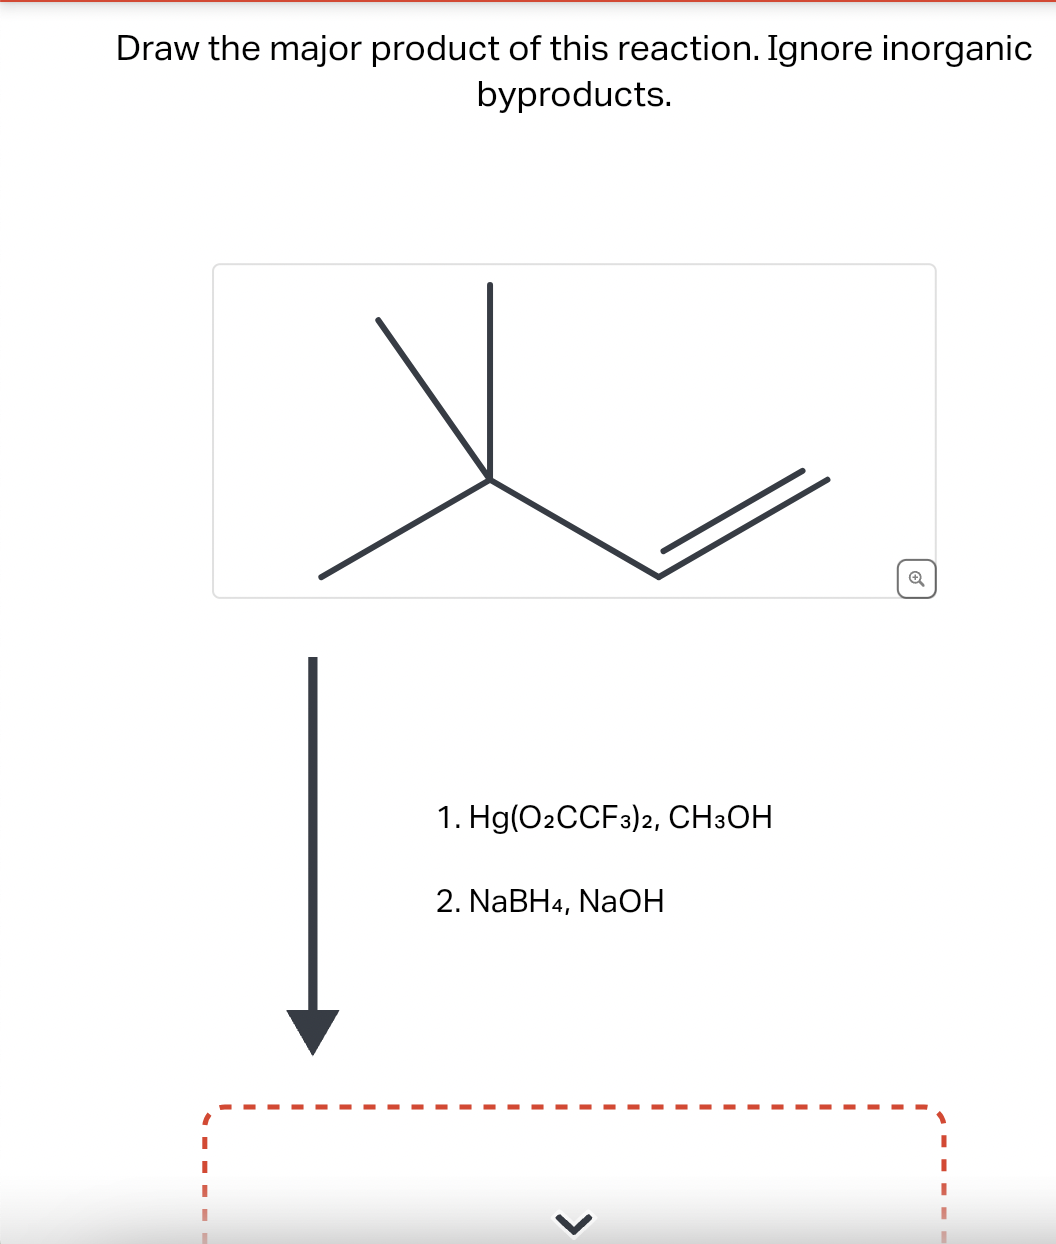 Draw the major product of this reaction. Ignore inorganic
byproducts.
1. Hg(O2CCF3)2, CH3OH
2. NABH4, NaOH